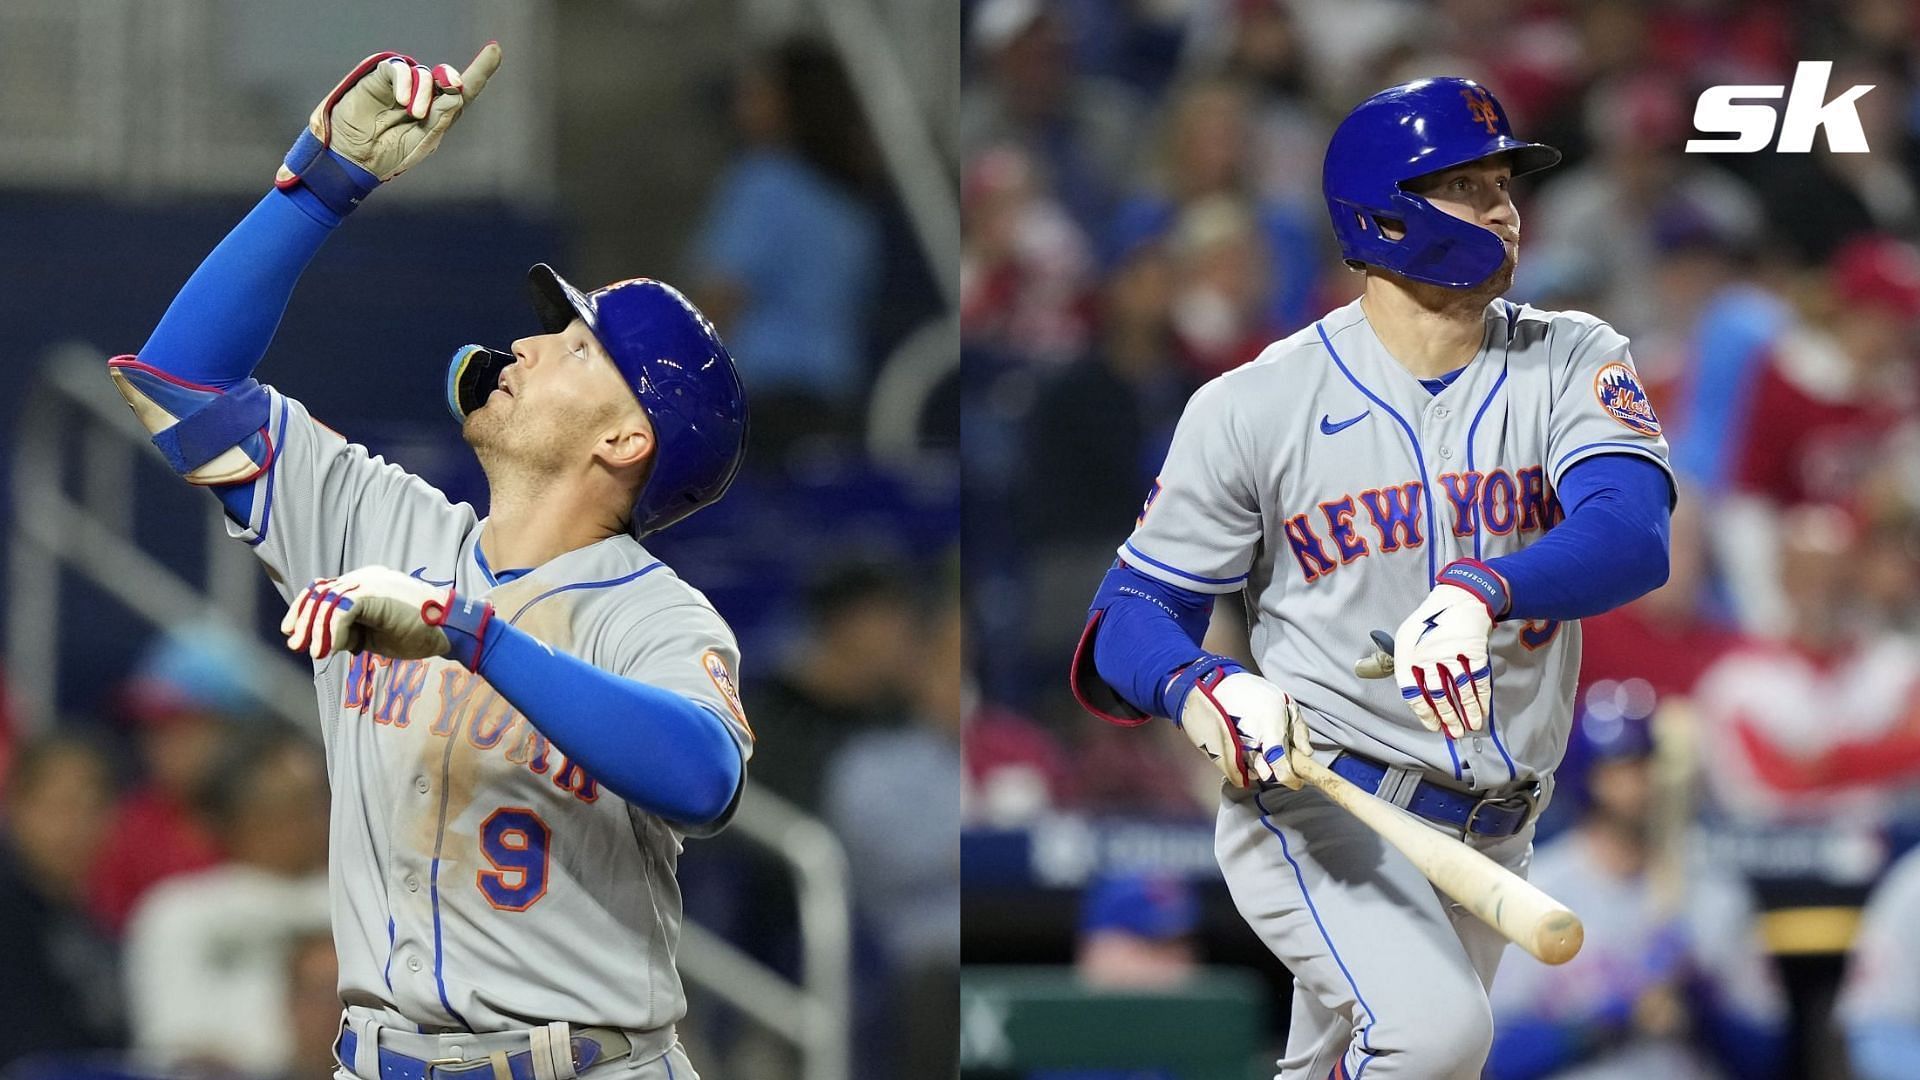 Brandon Nimmo has turned heads with his new $5,000,000 mansion